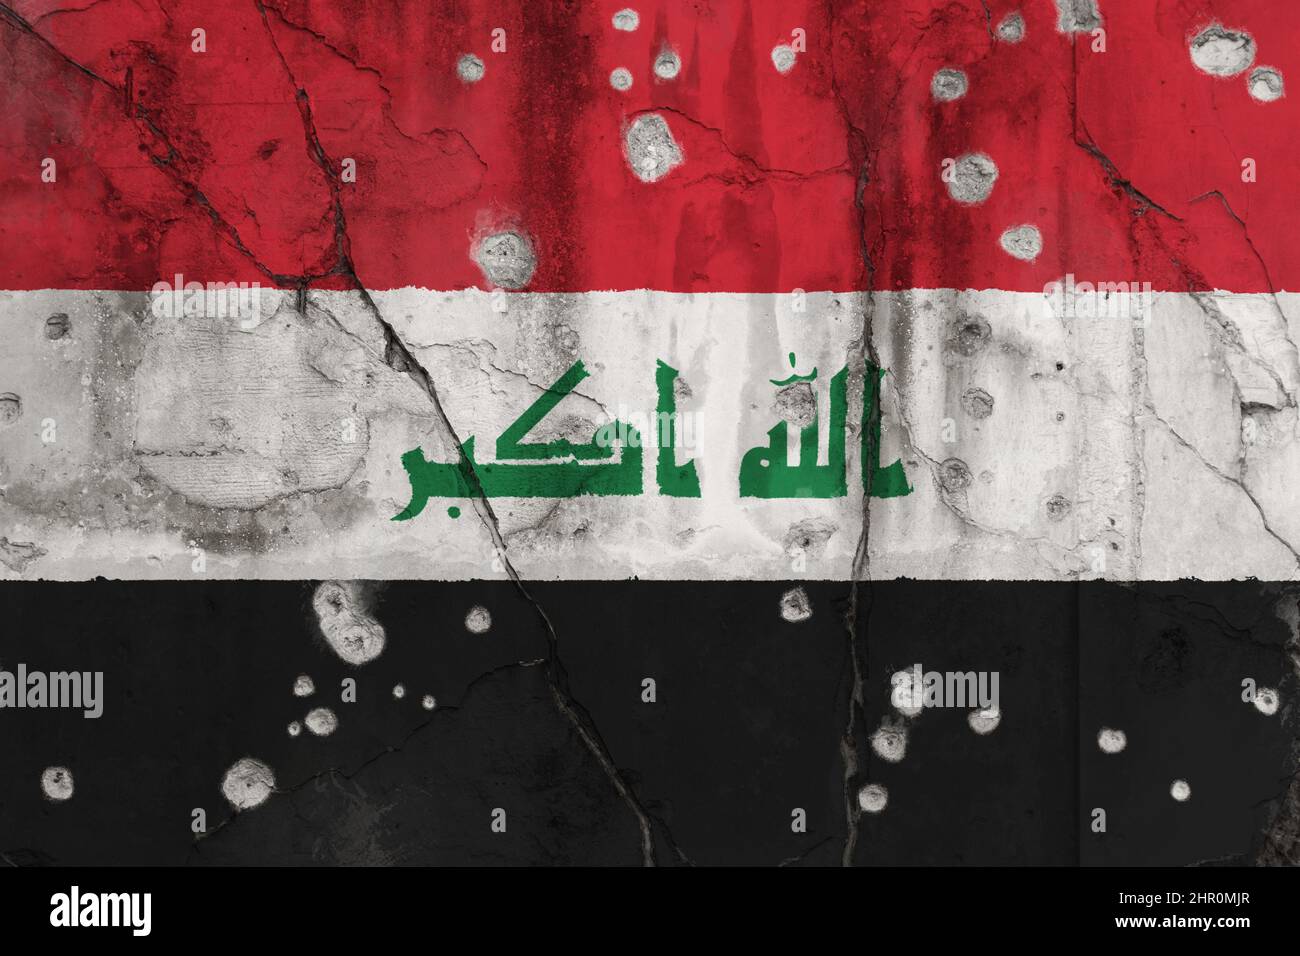 Full frame photo of a weathered flag of Iraq painted on a cracked wall with bullet holes. Islamic State insurgency in Iraq and violence concept. Stock Photo